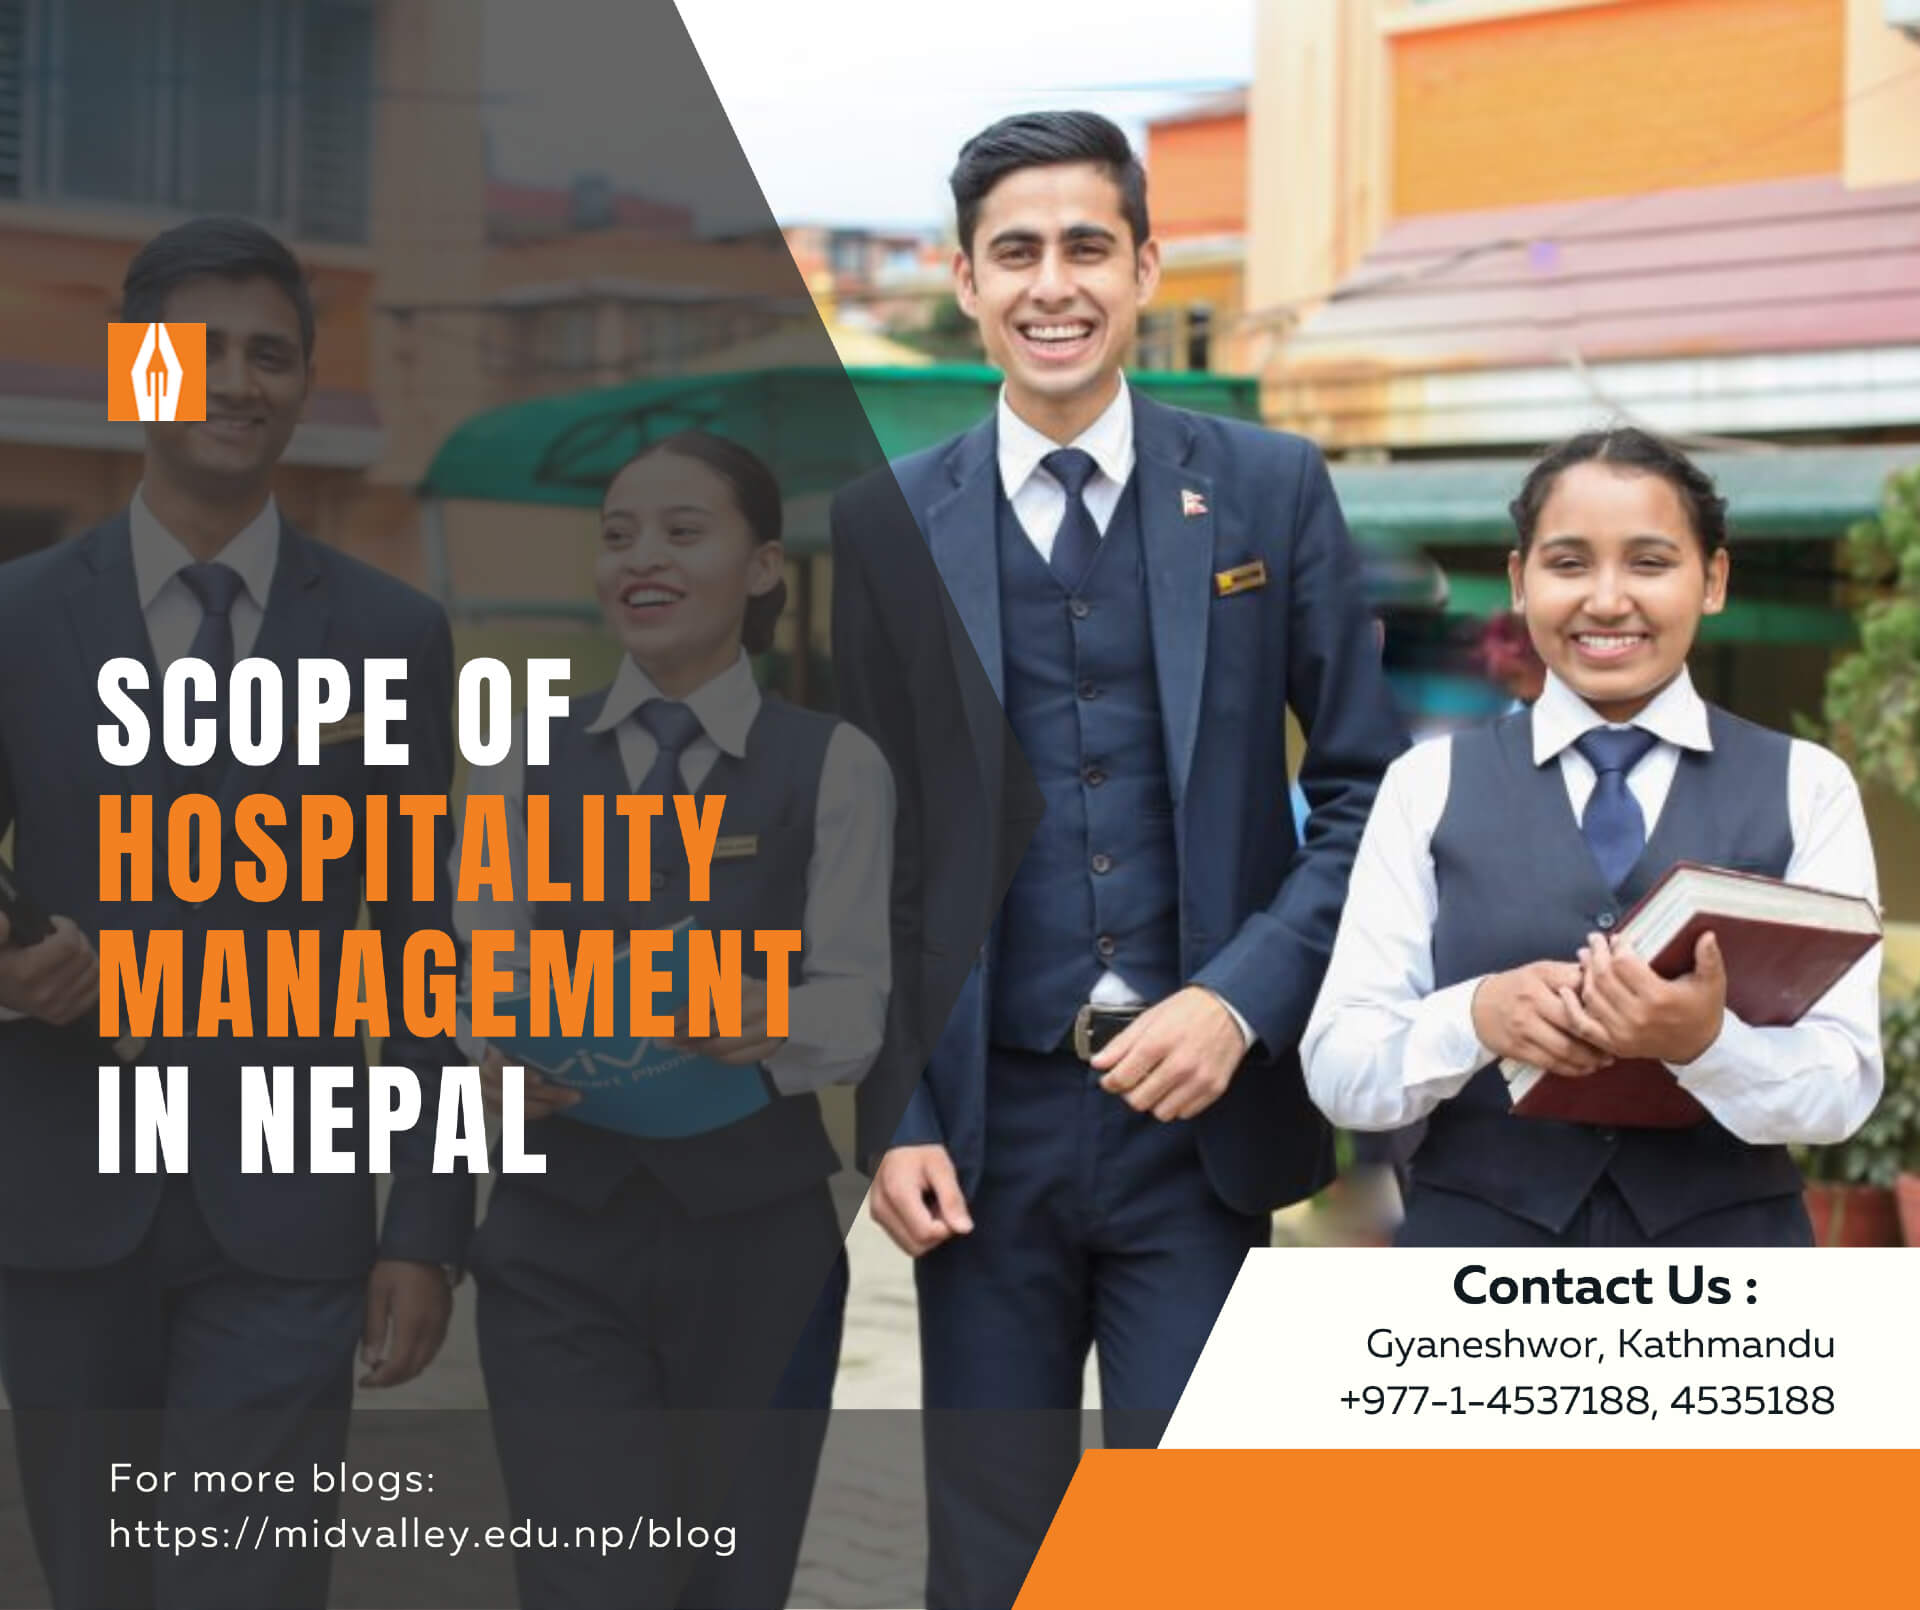 What is the Scope of Hospitality Management in Nepal